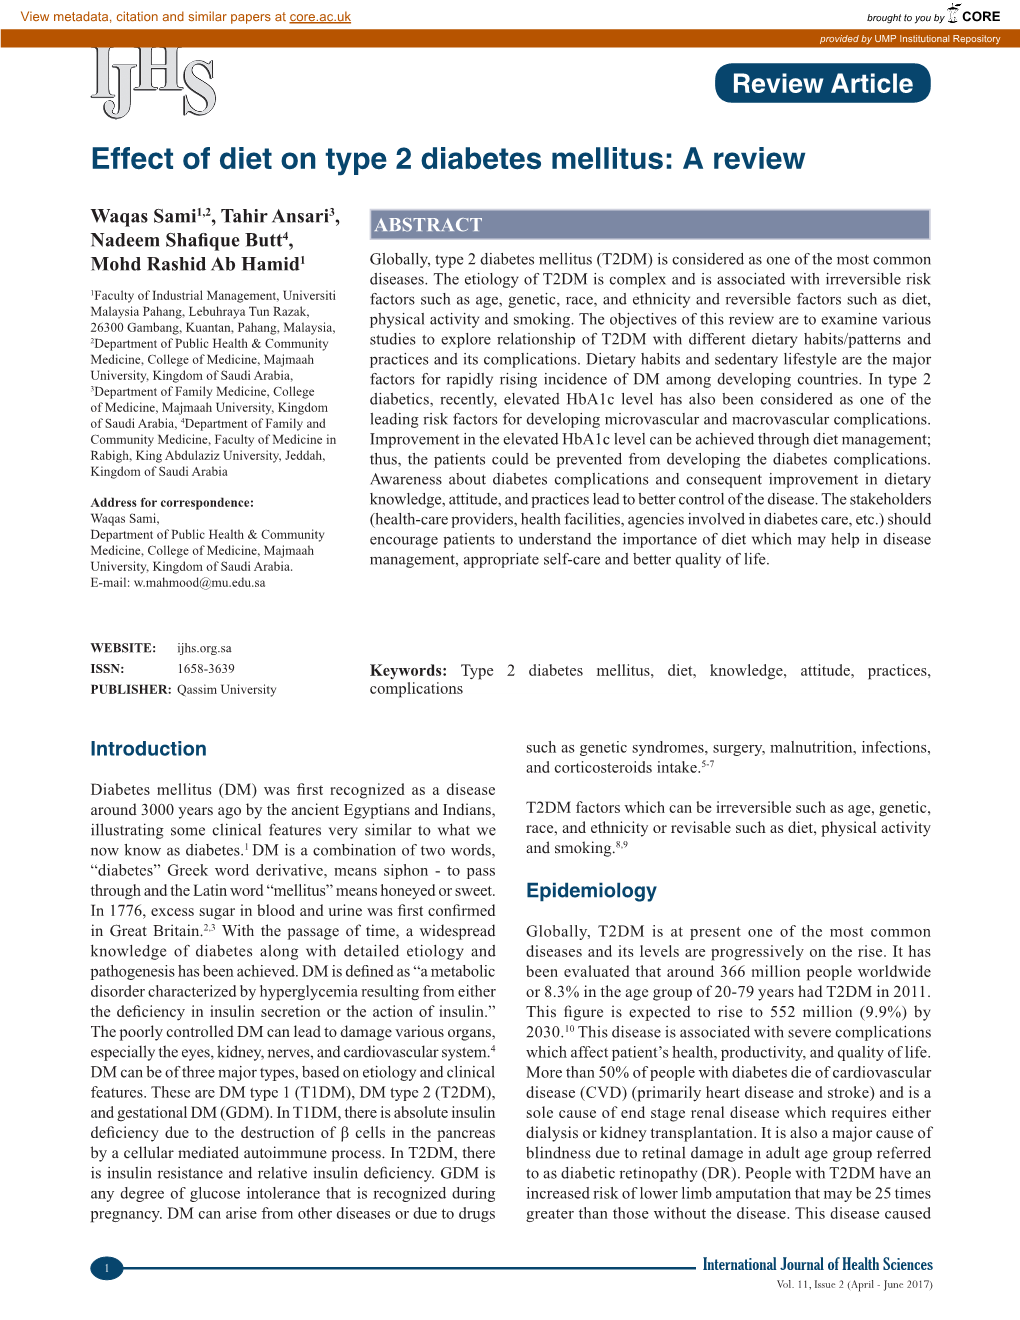 Effect of Diet on Type 2 Diabetes Mellitus: a Review